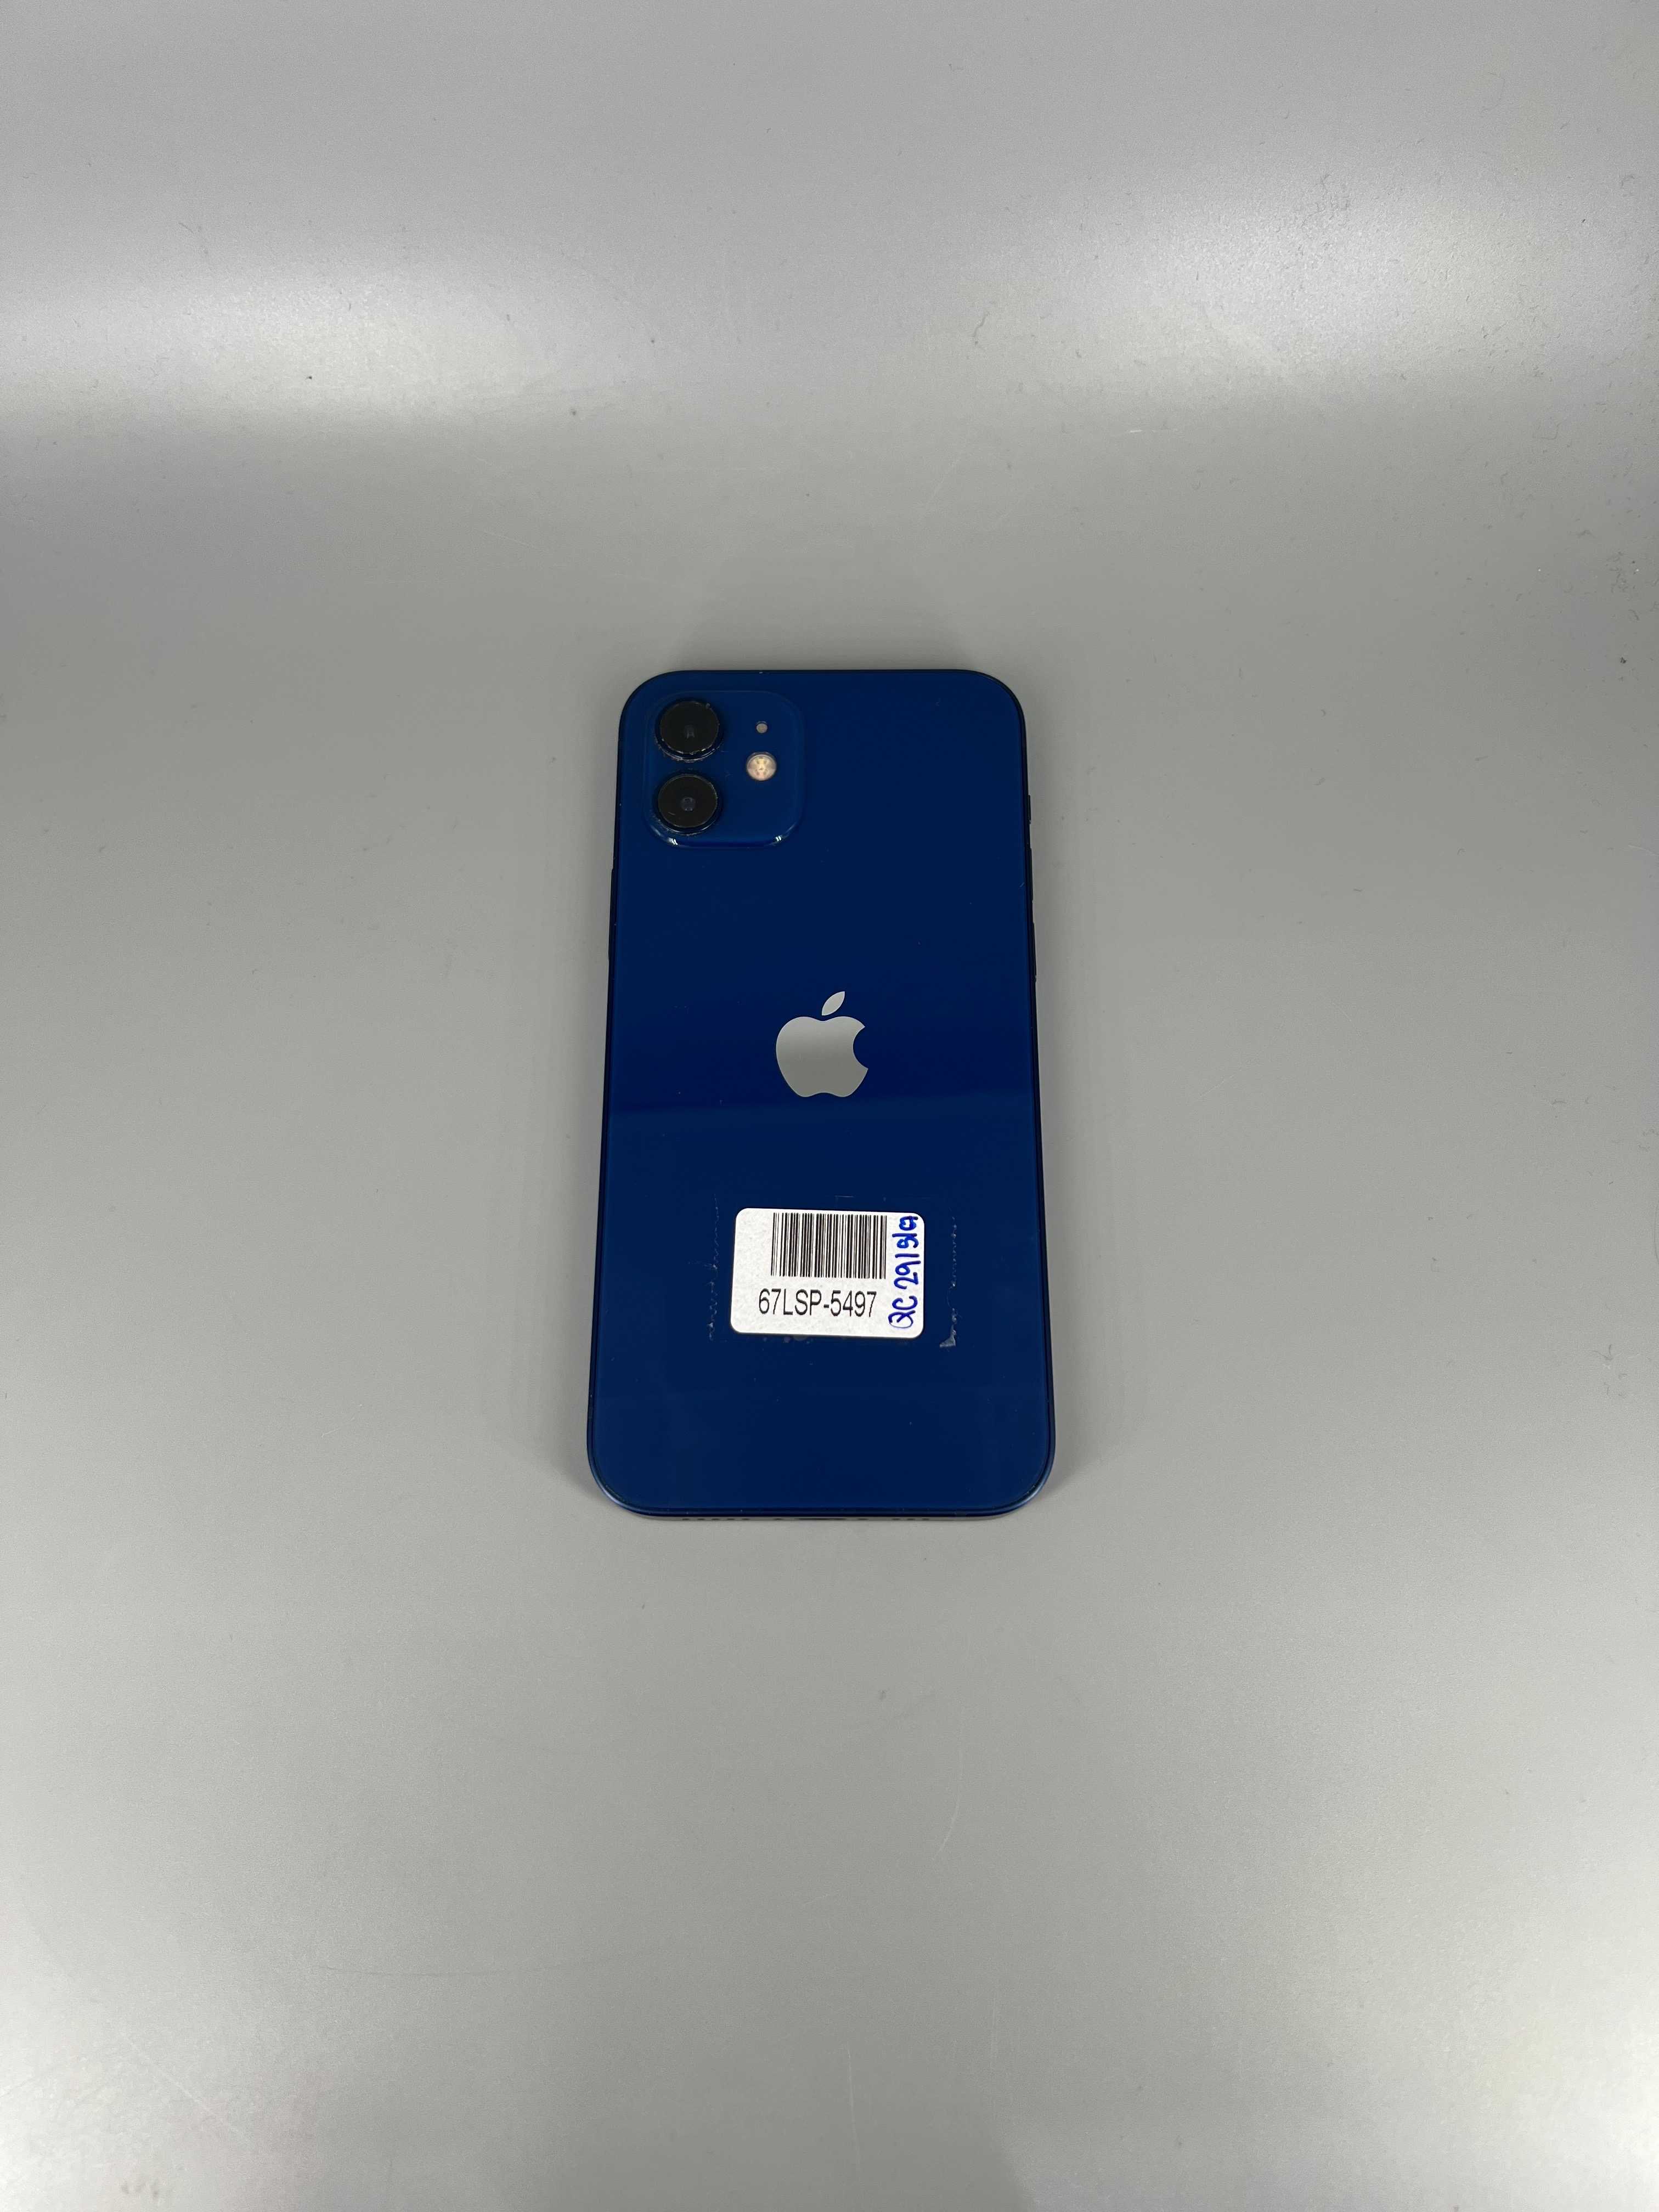 Used iPhone 12 128GB Blue 67LSP-5497